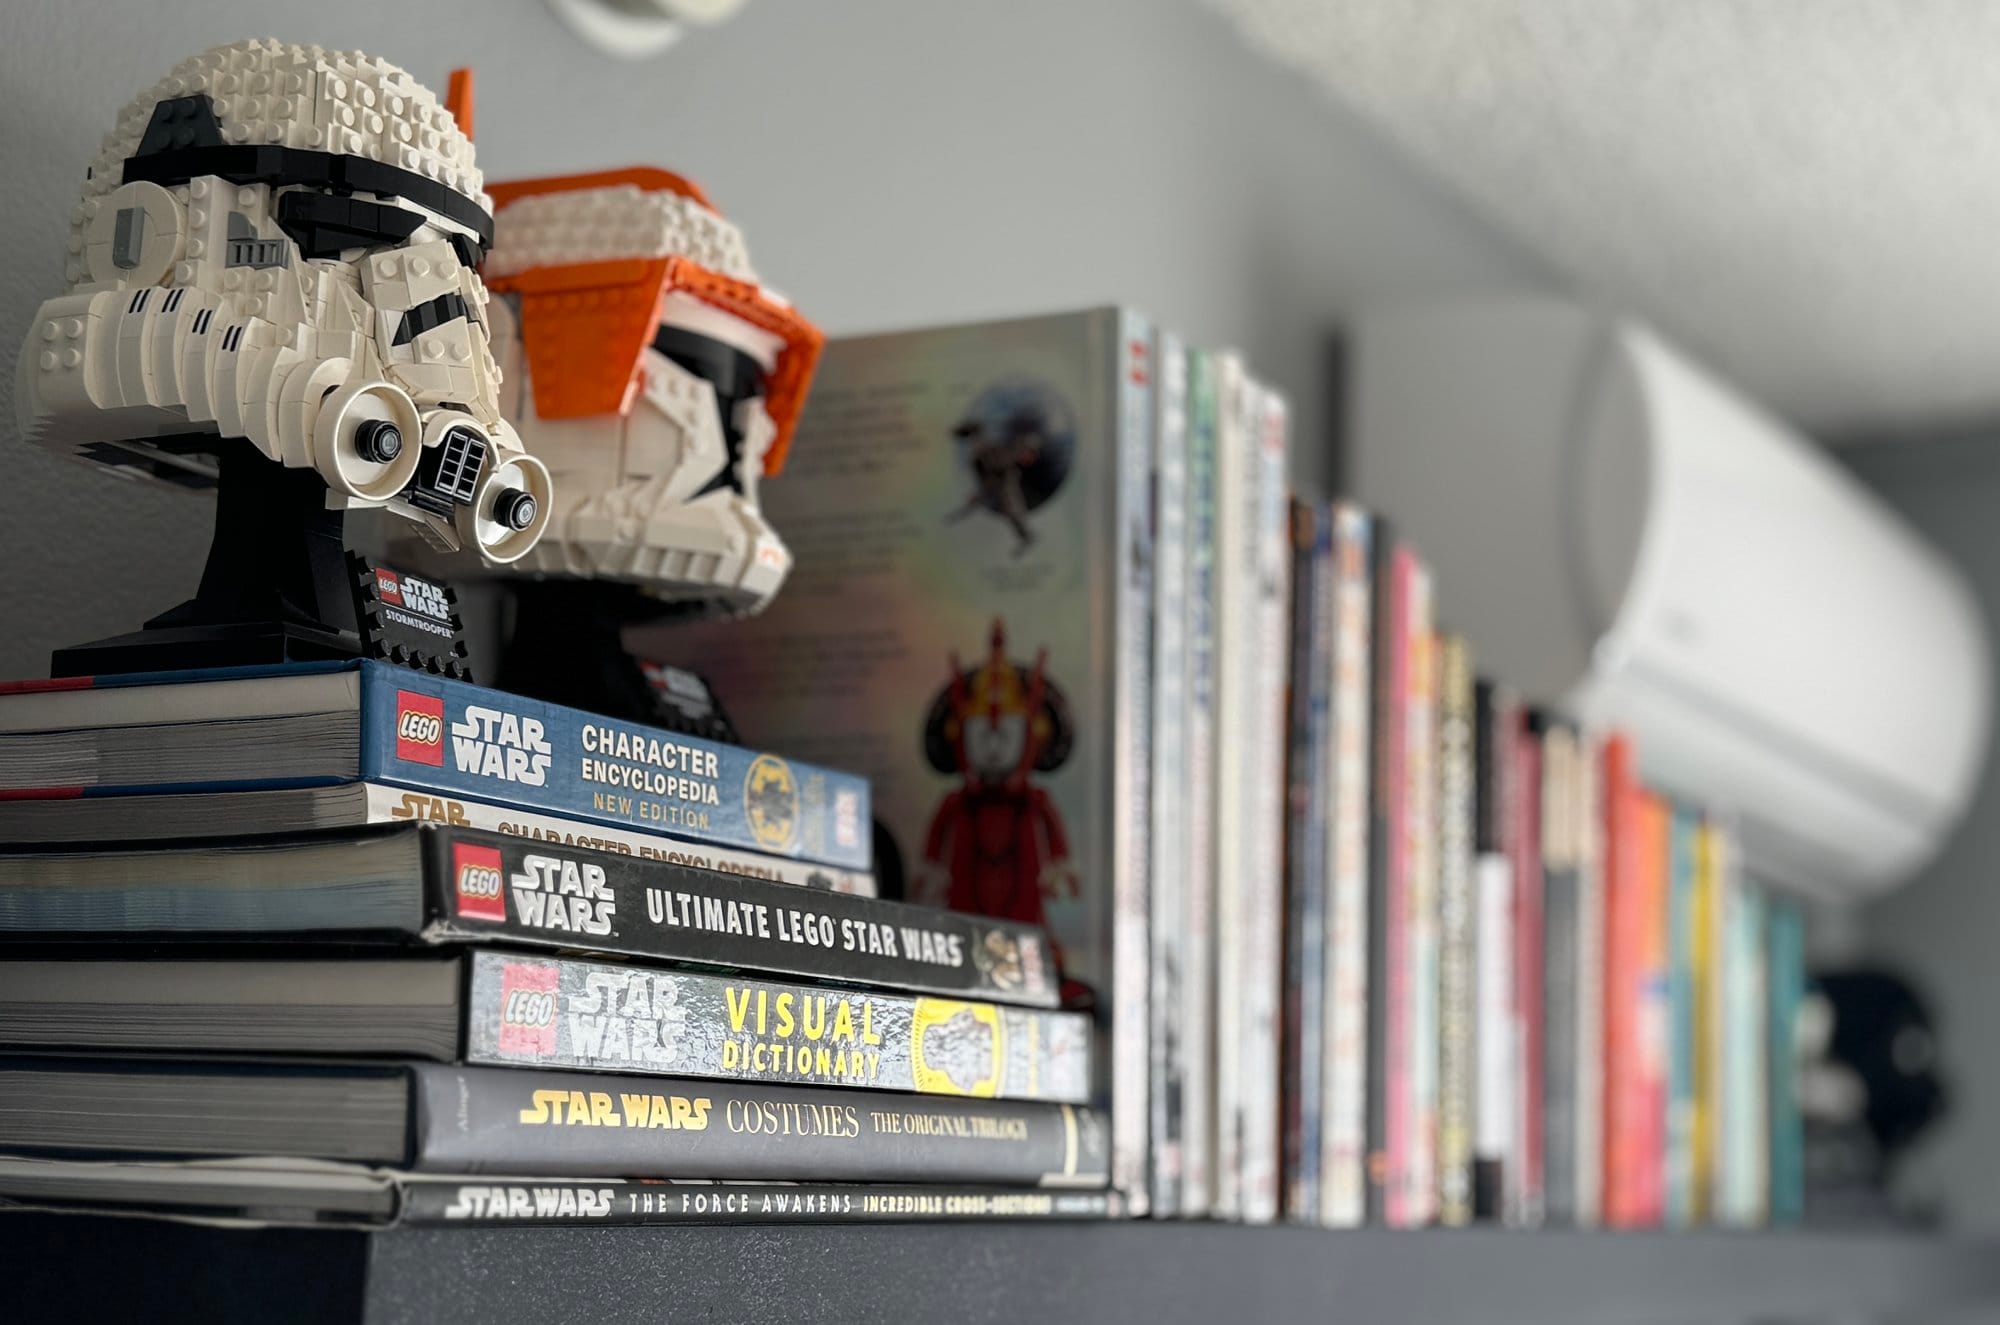 A bookshelf featuring a selection of Star Wars books and encyclopedias, with LEGO Star Wars helmet models displayed on top, and other books blurred in the background